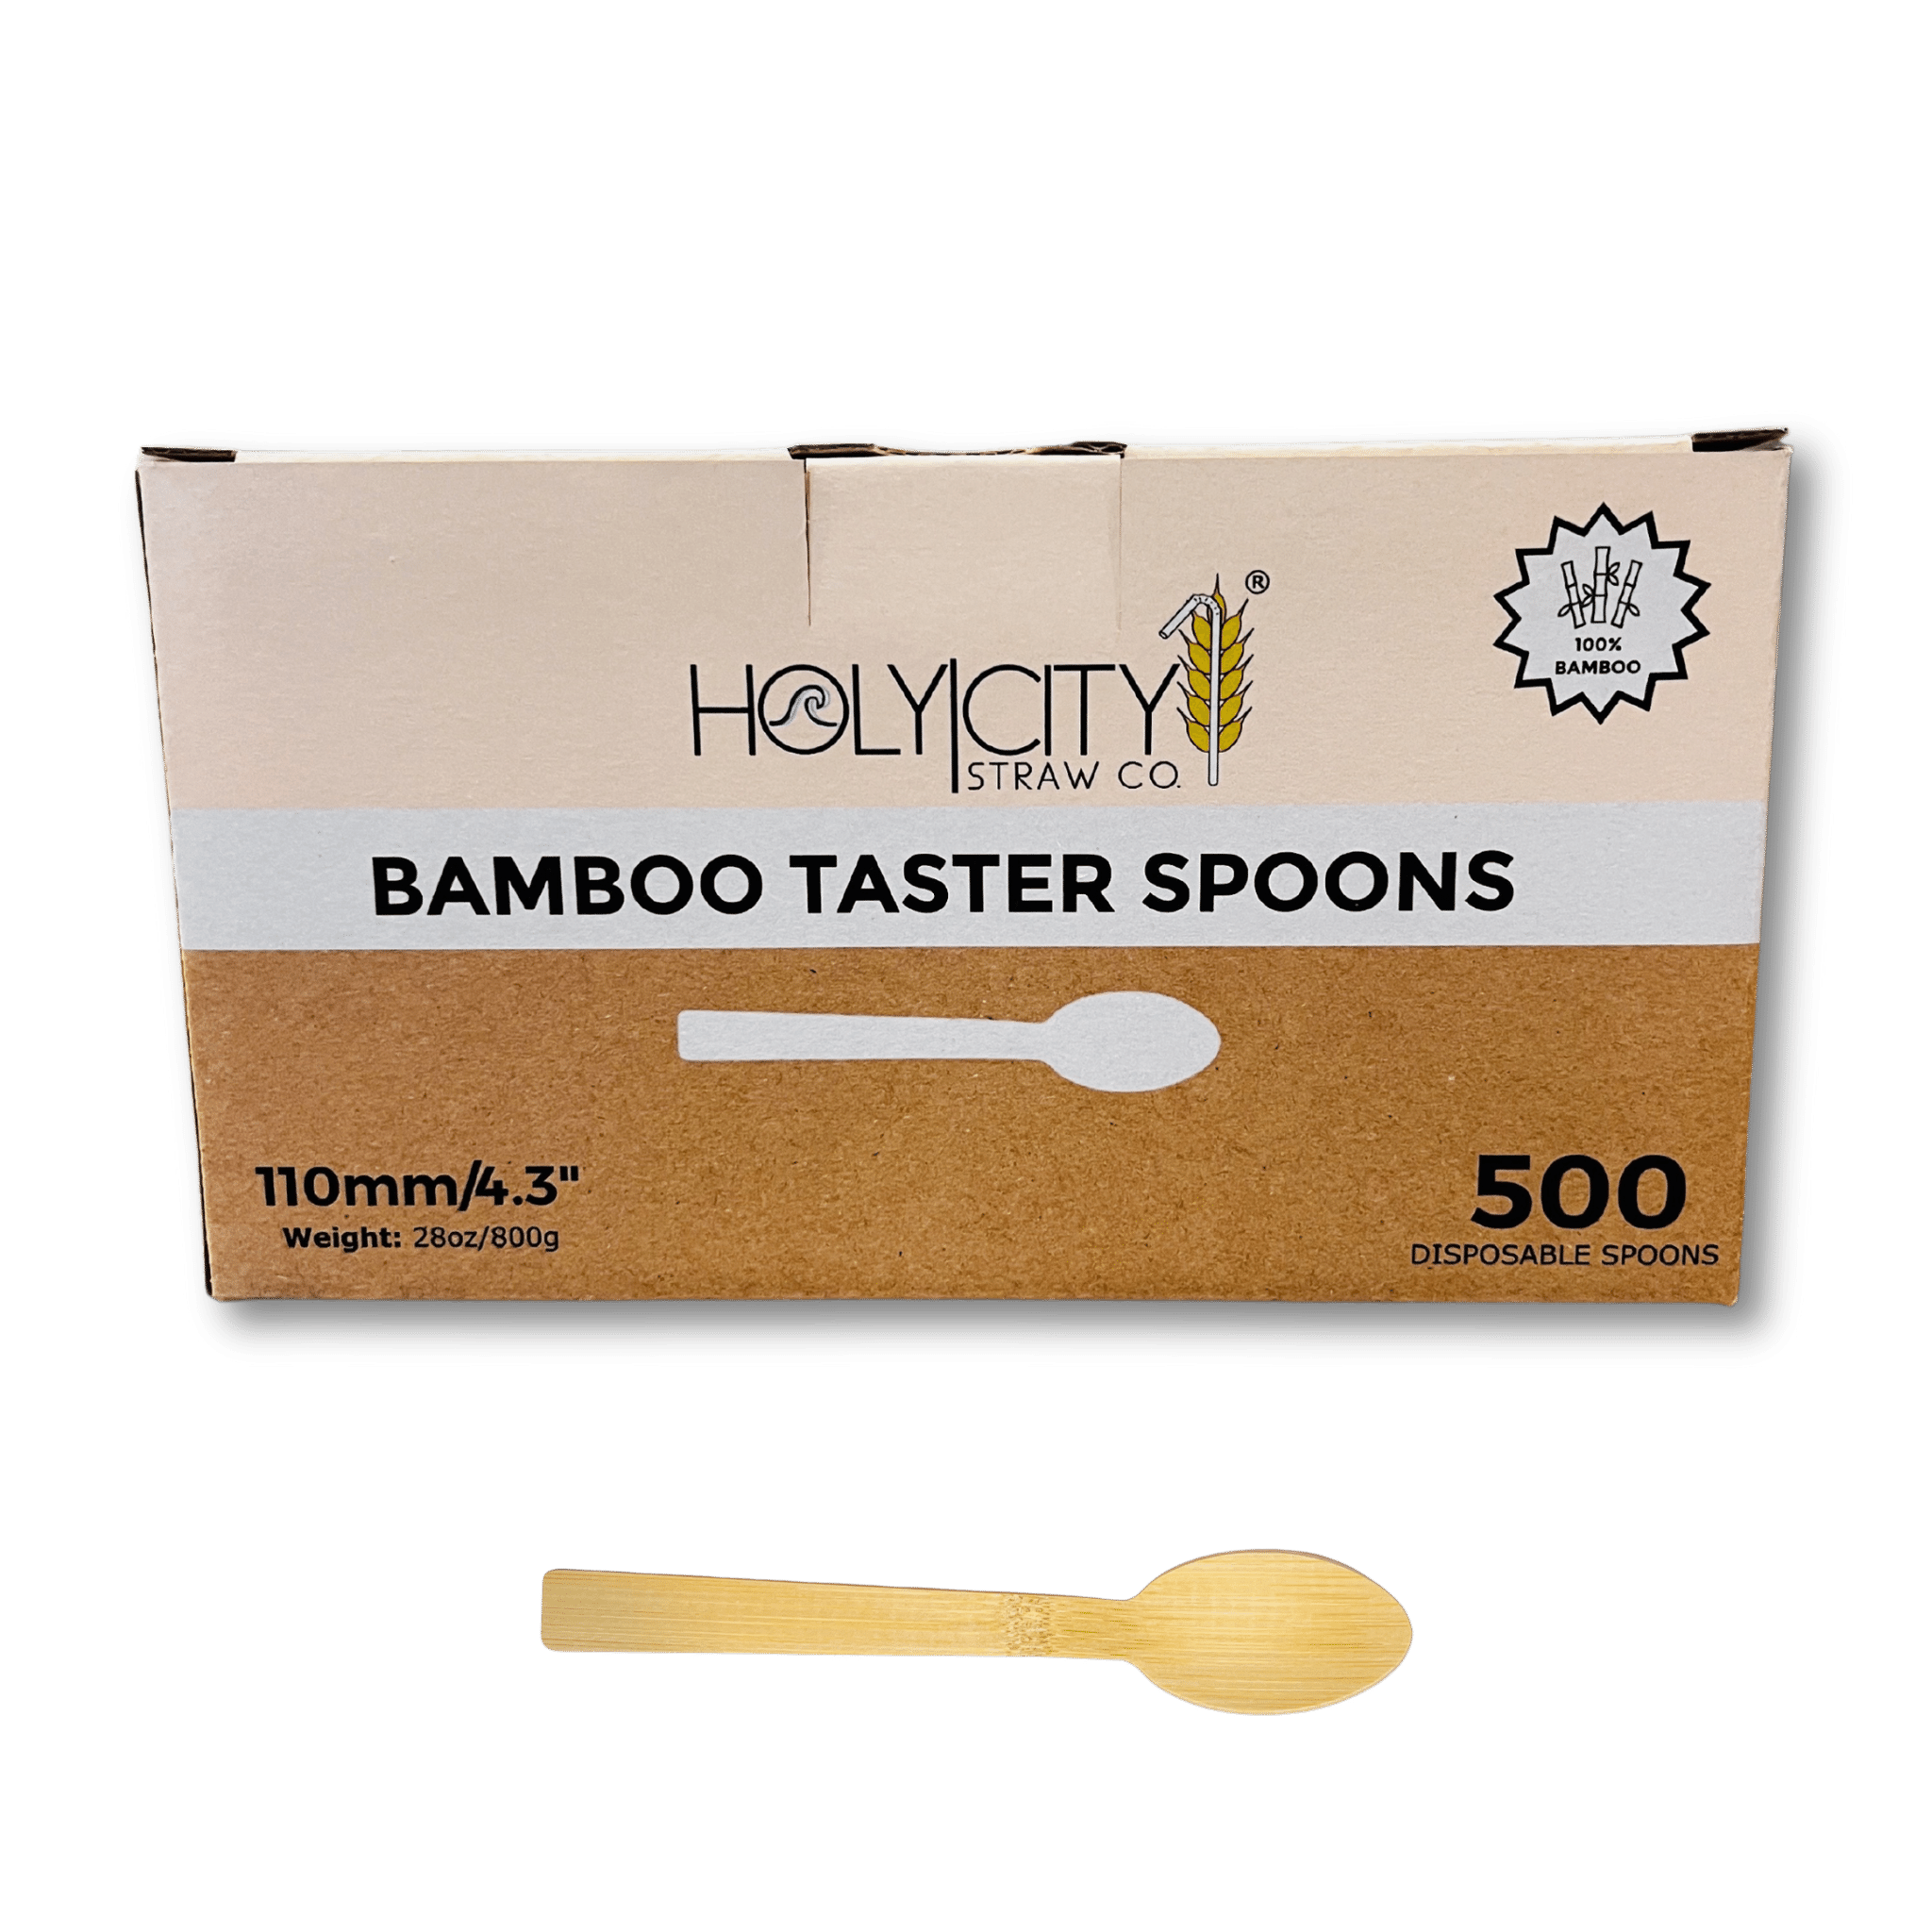 Box of Holy City Straw Company Wrapped Bamboo Taster Spoons  500 disposable spoons